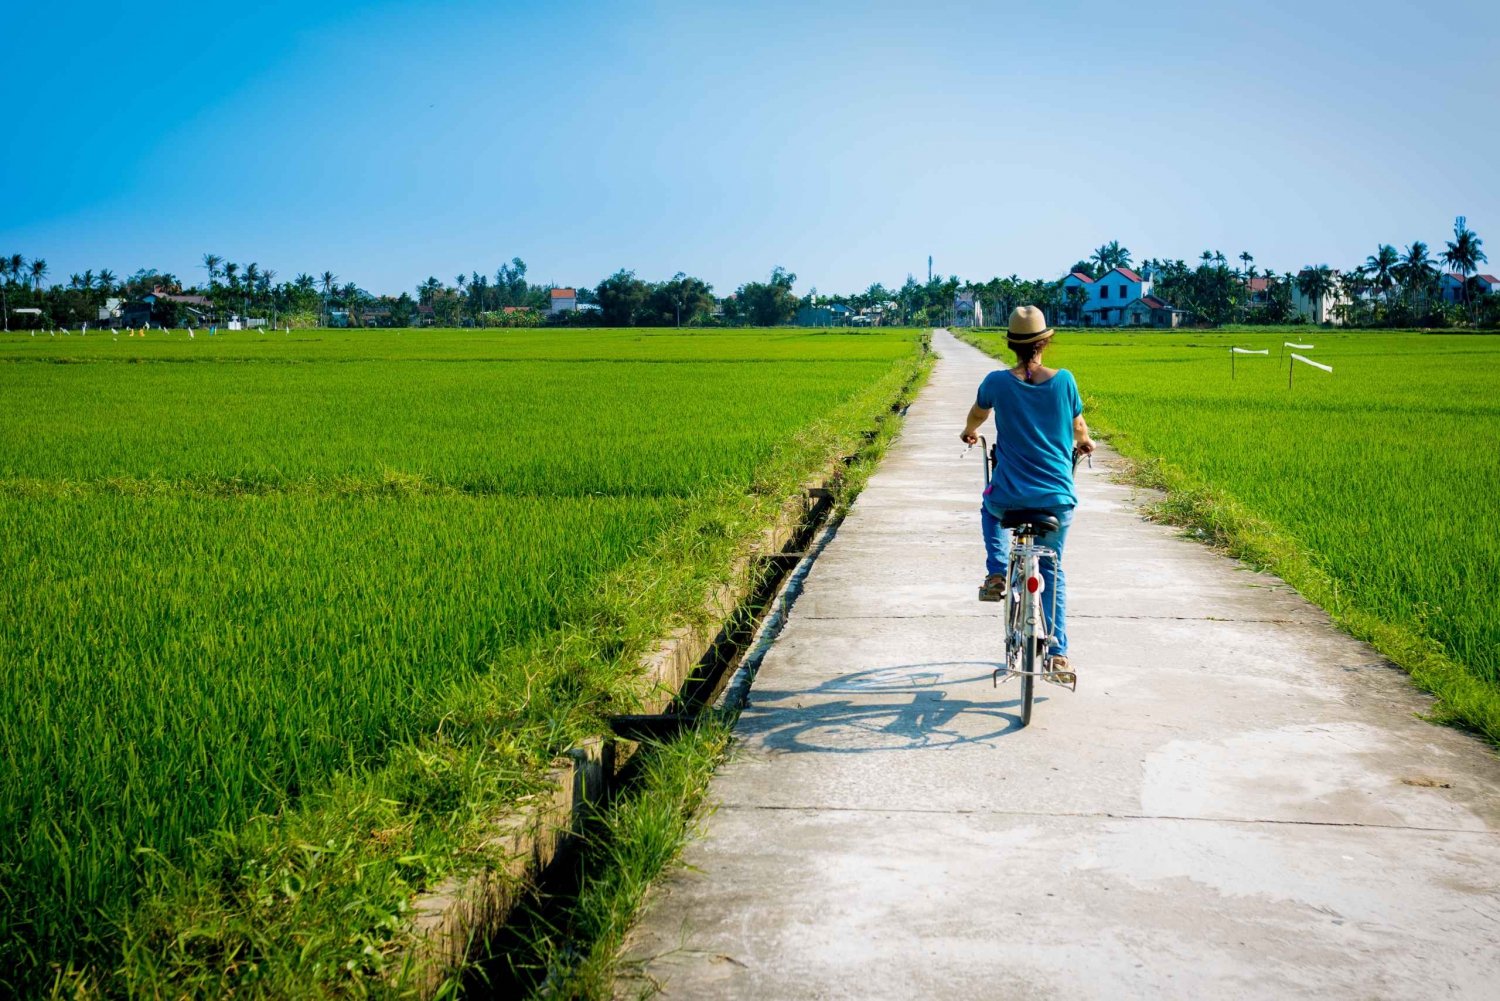 From Hoi An: Interactive Rice Farming Tour